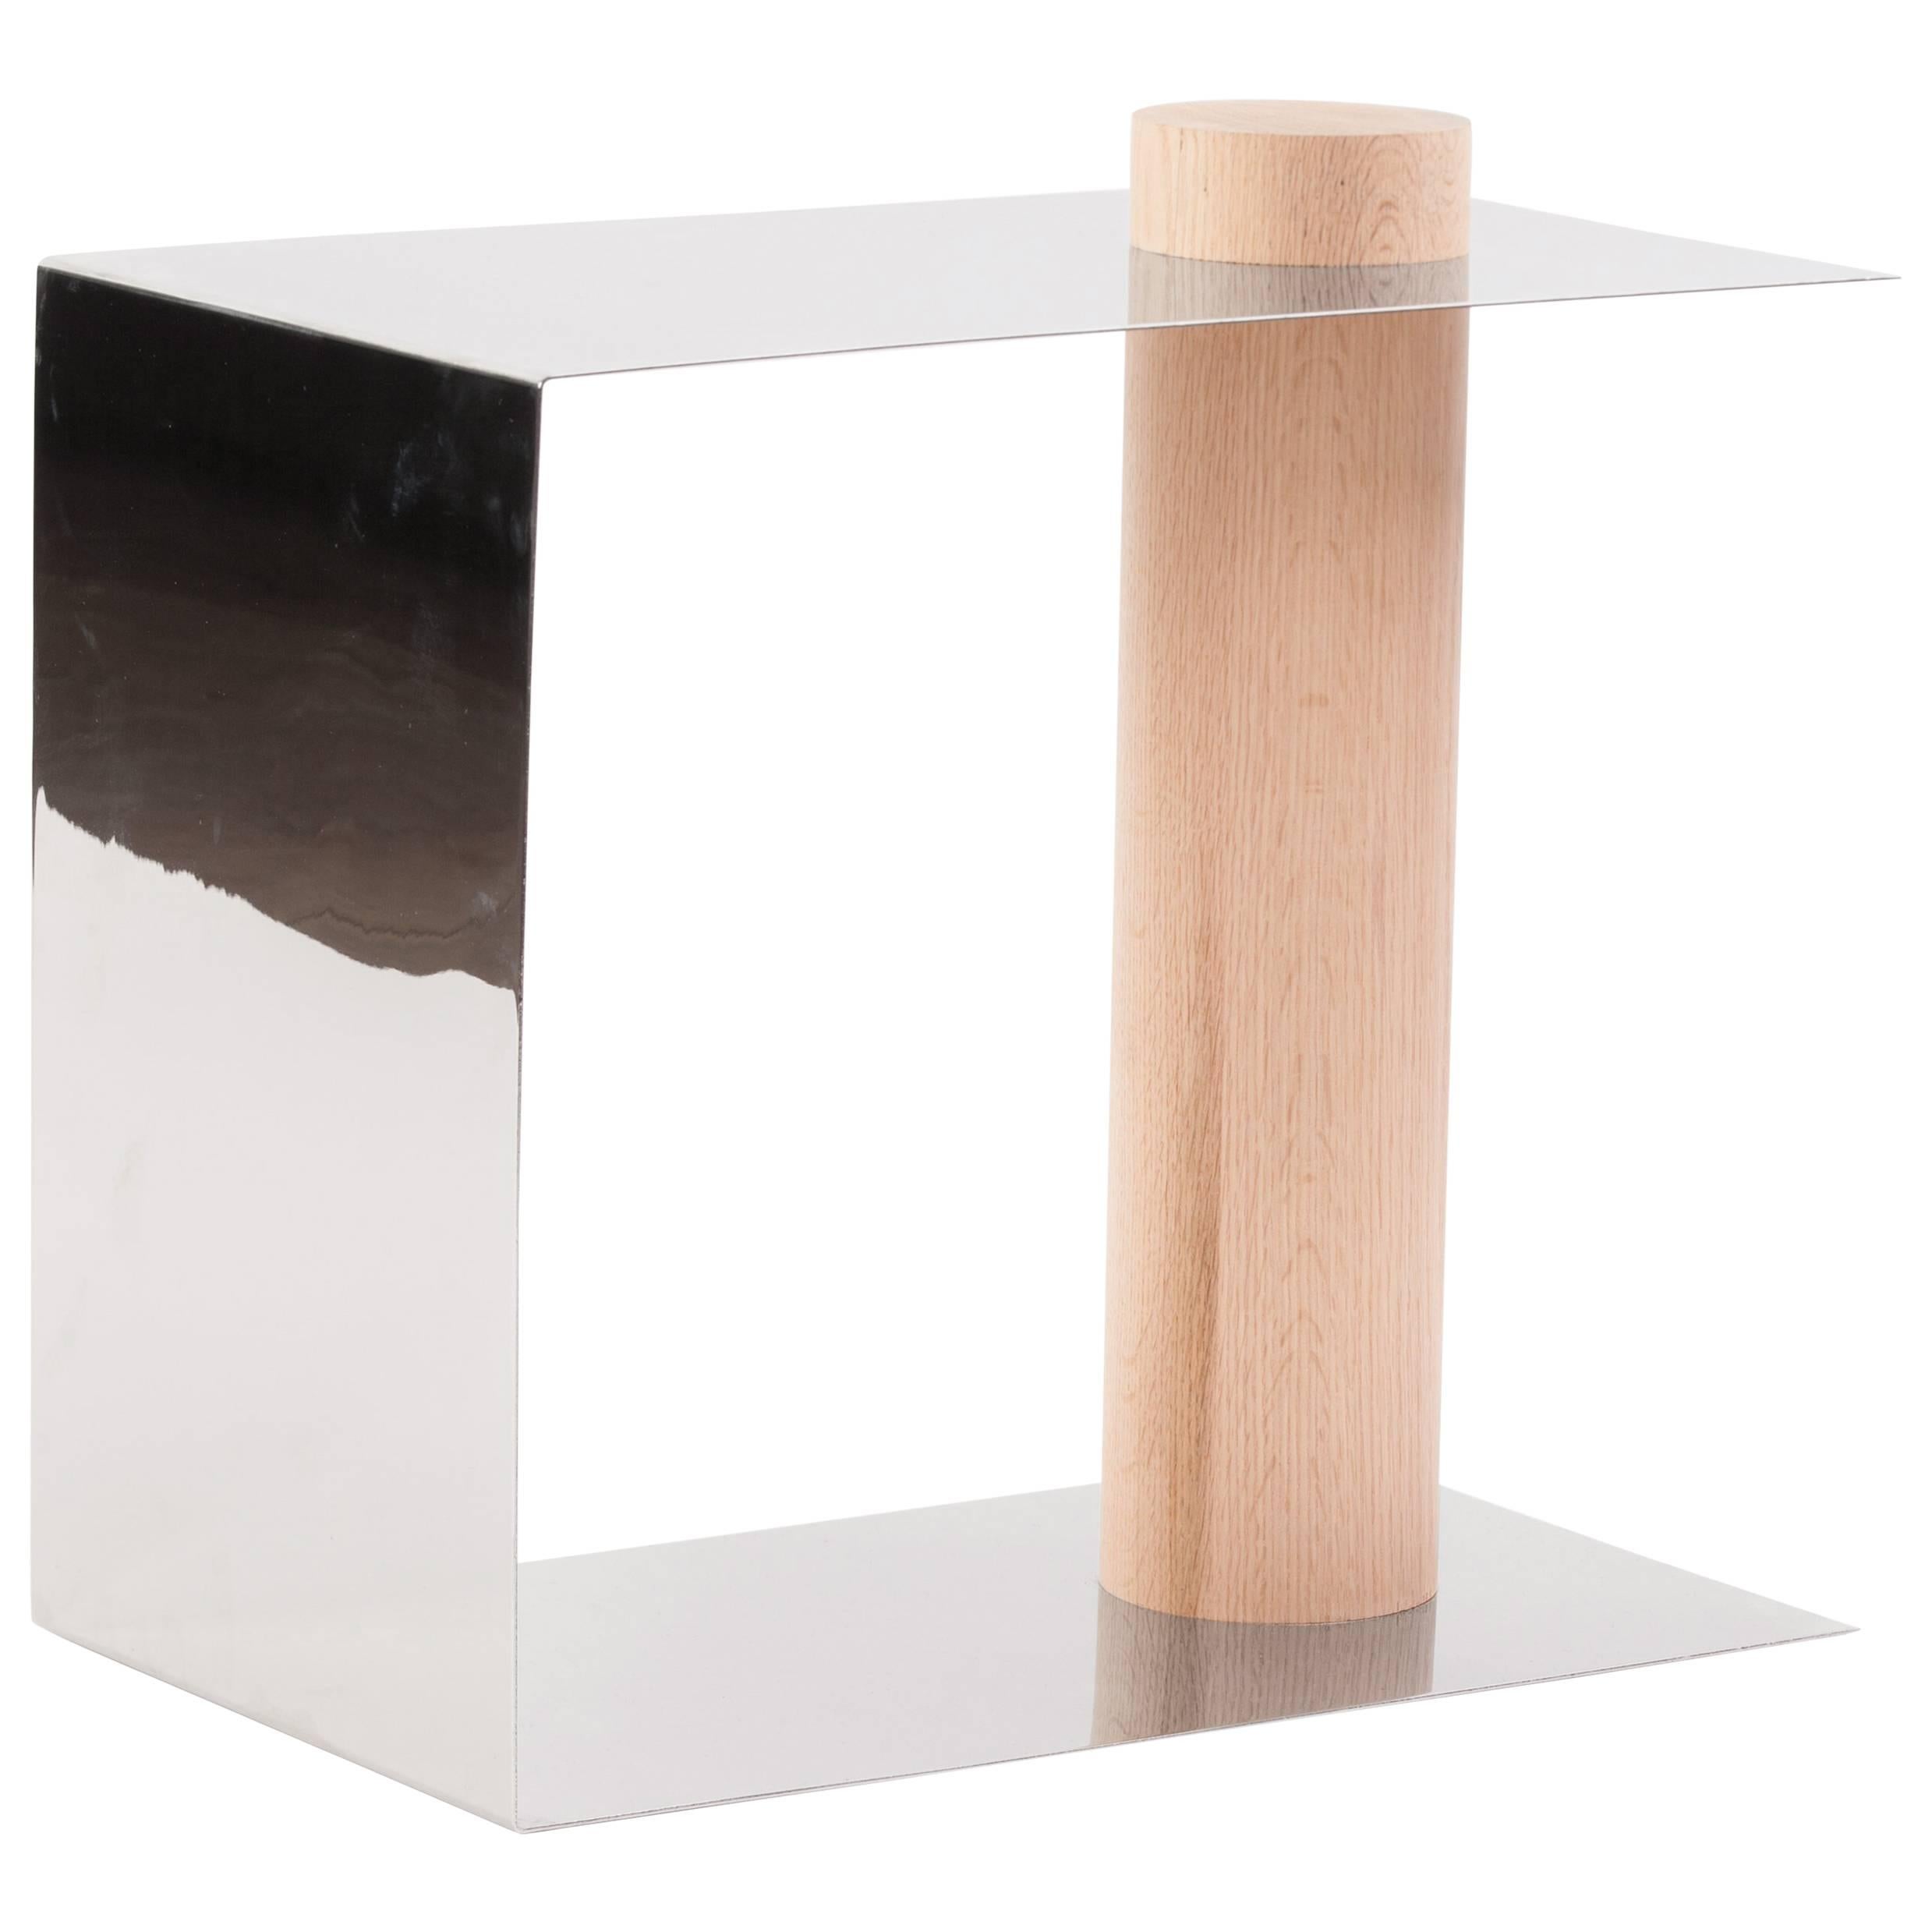 PURU Side Table in Polished Stainless Steel & White Oak by Estudio Persona